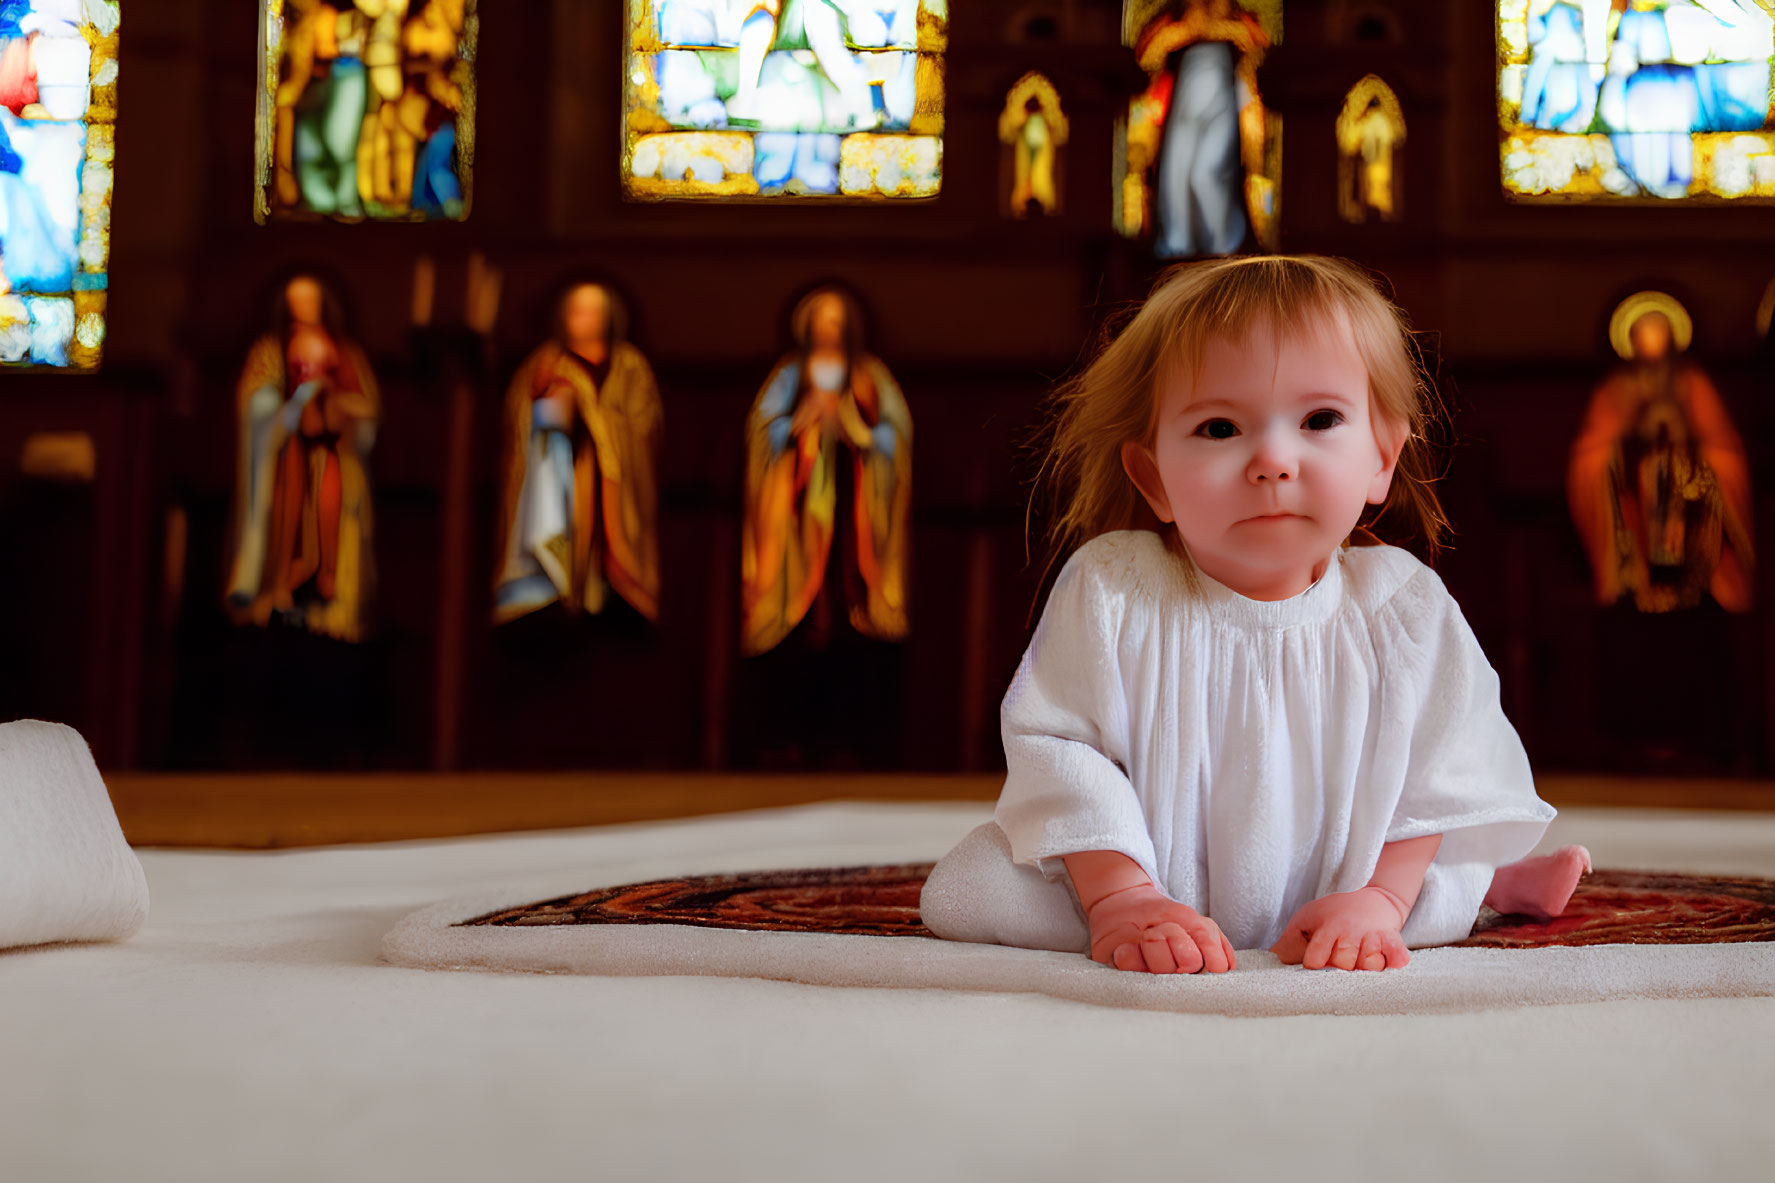 Toddler in White Dress Kneeling in Church with Stained Glass Windows